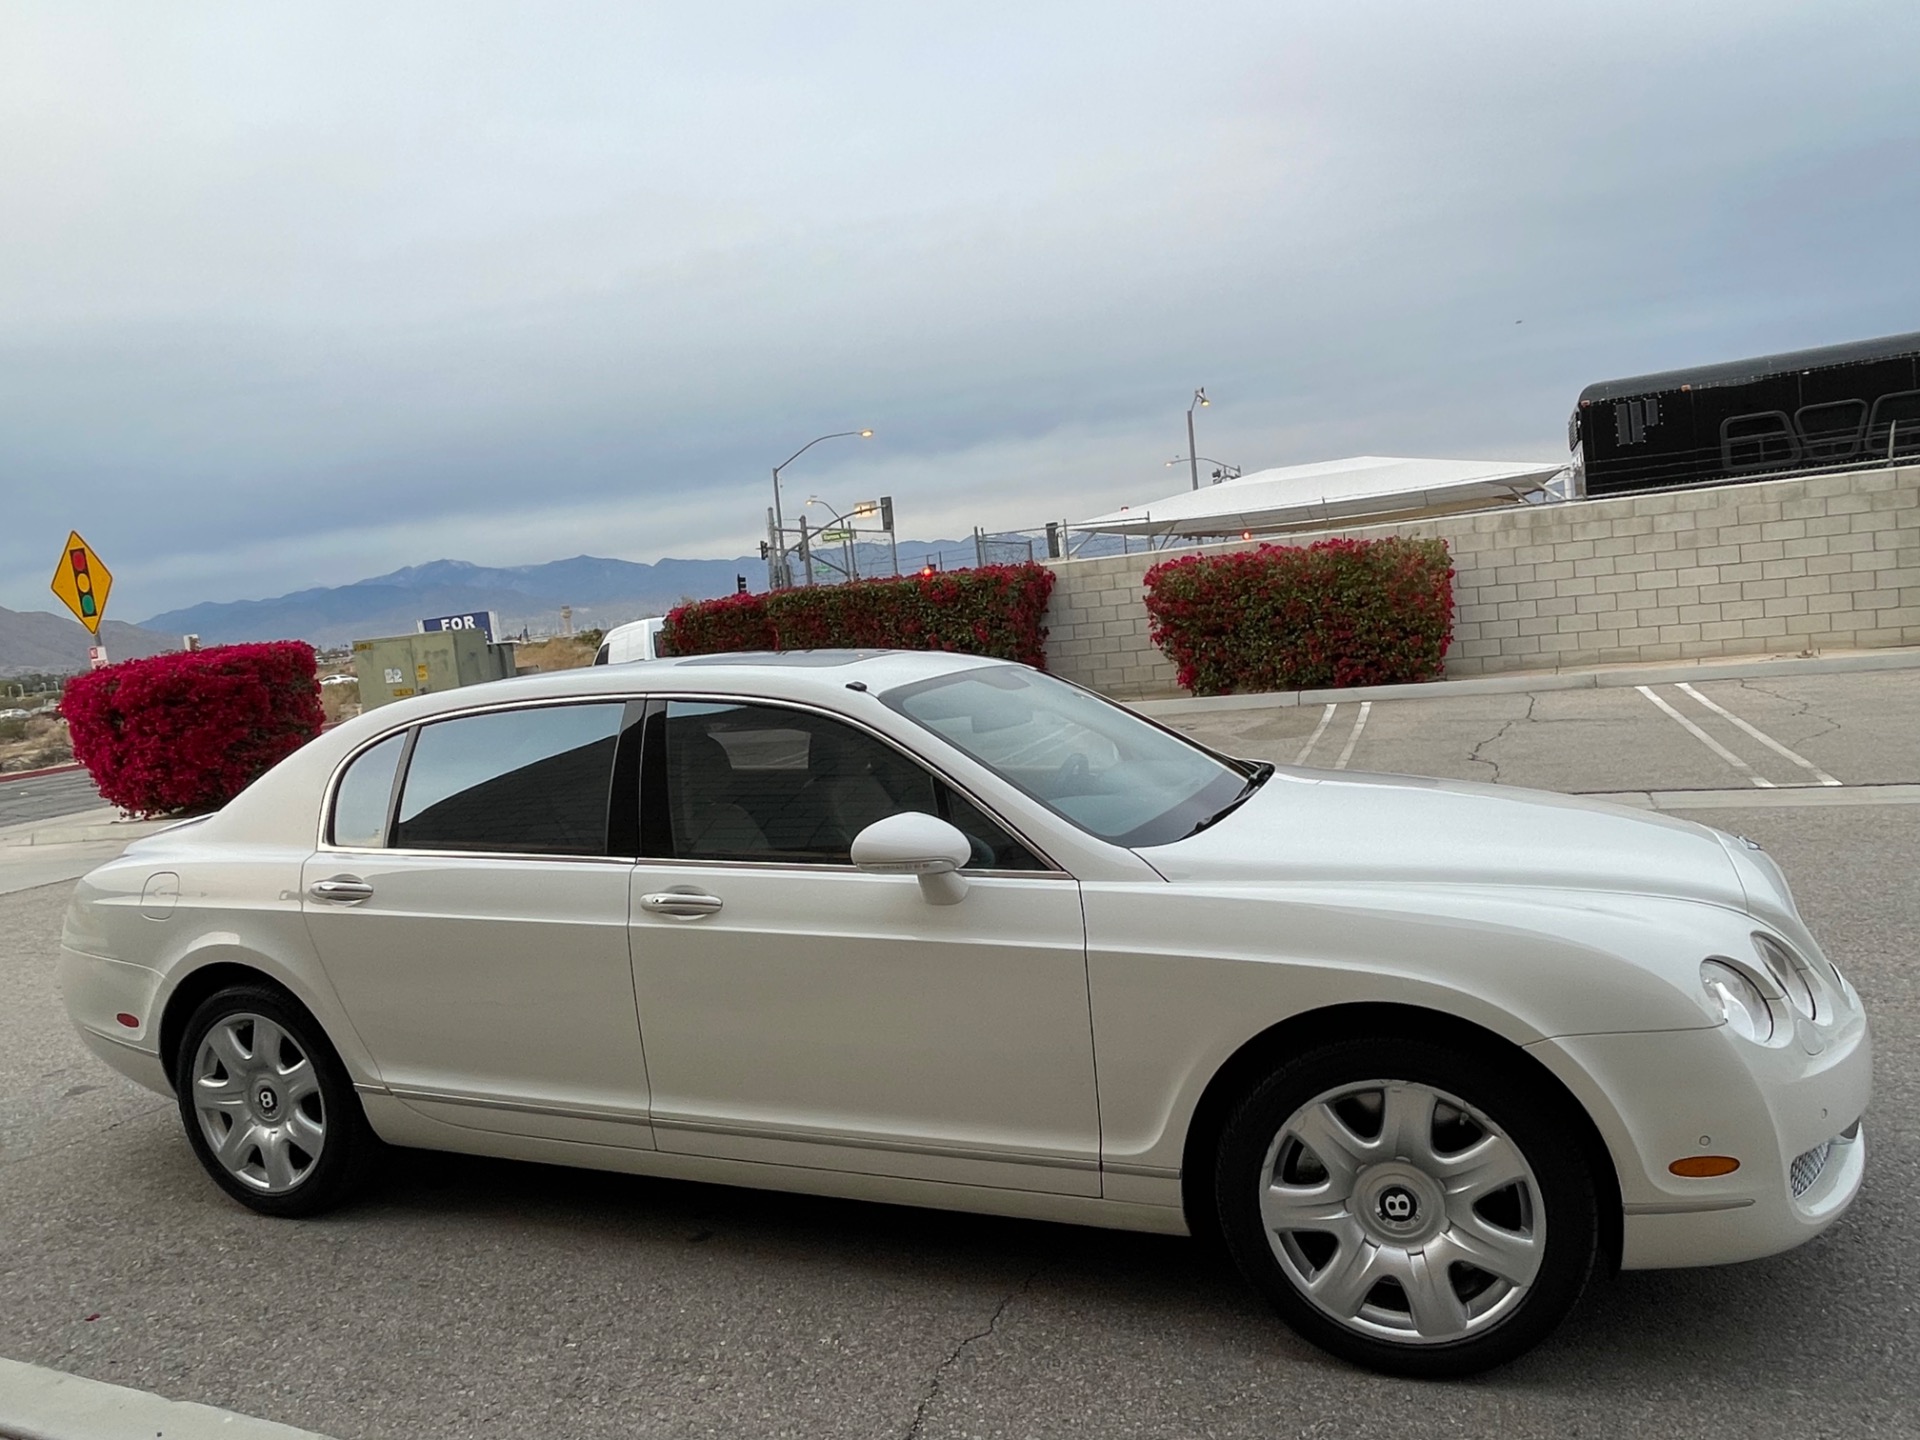 Used-2006-Bentley-Continental-Flying-Spur